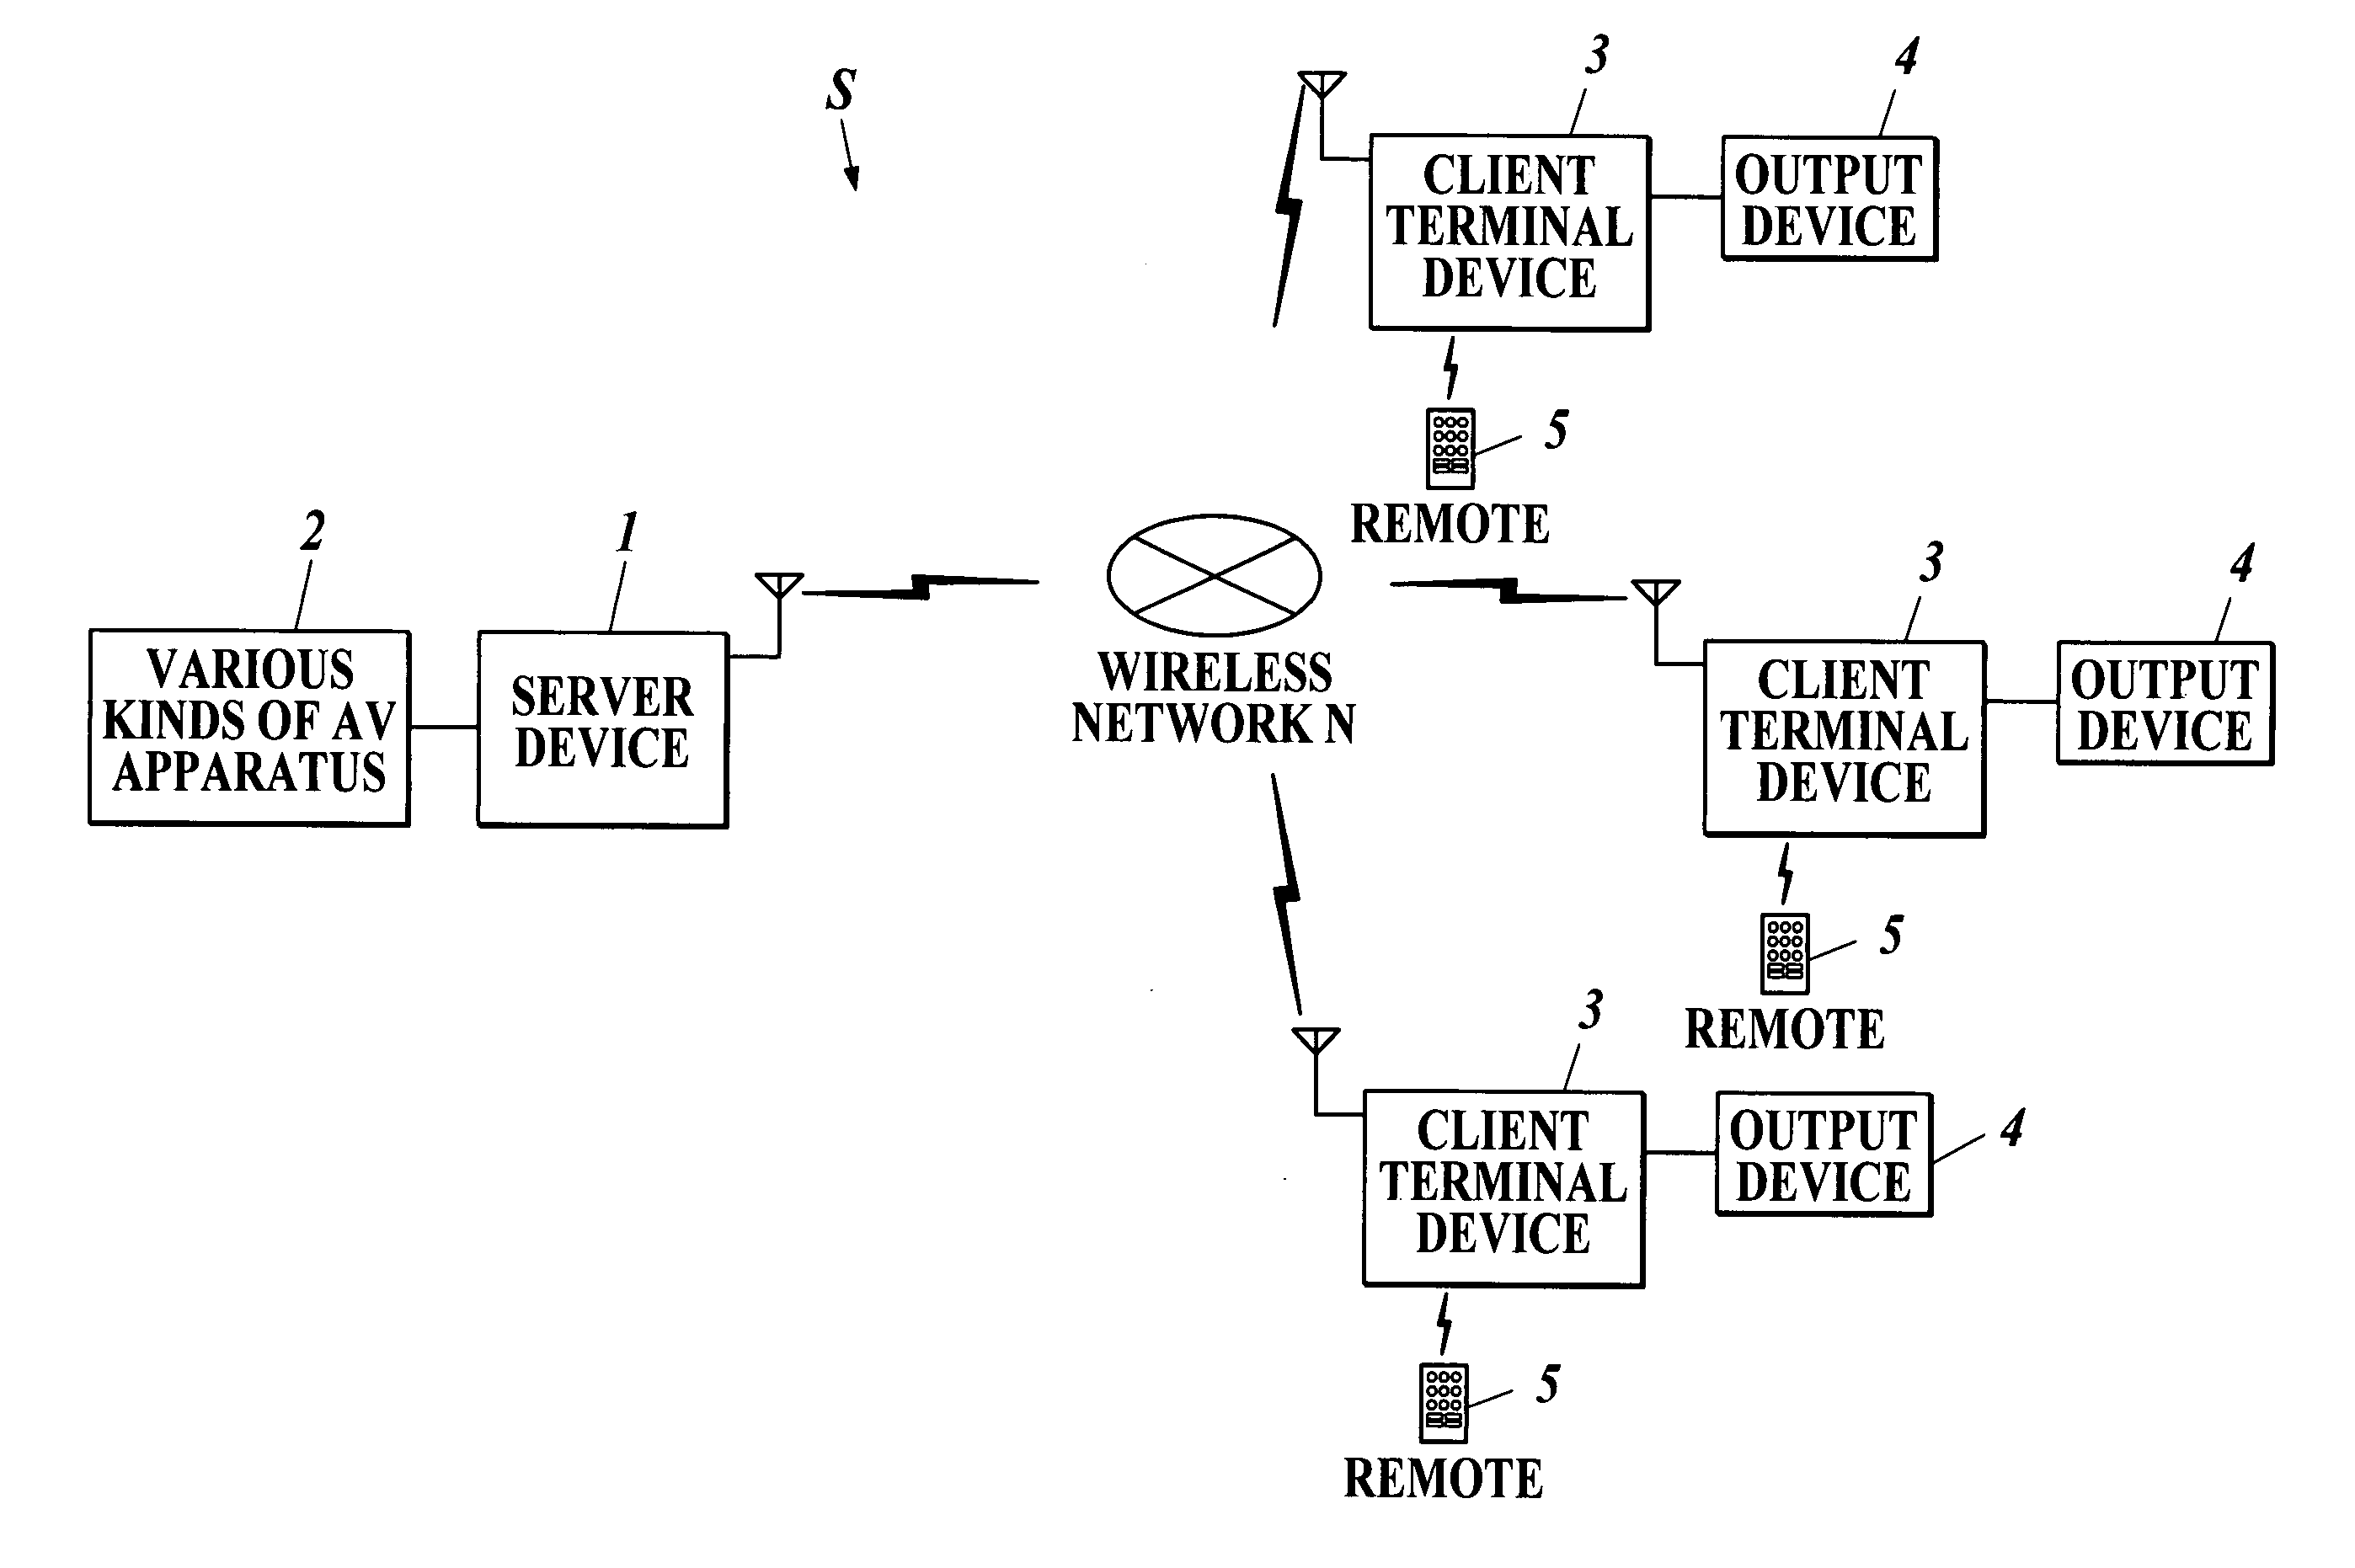 Client terminal device and client server system